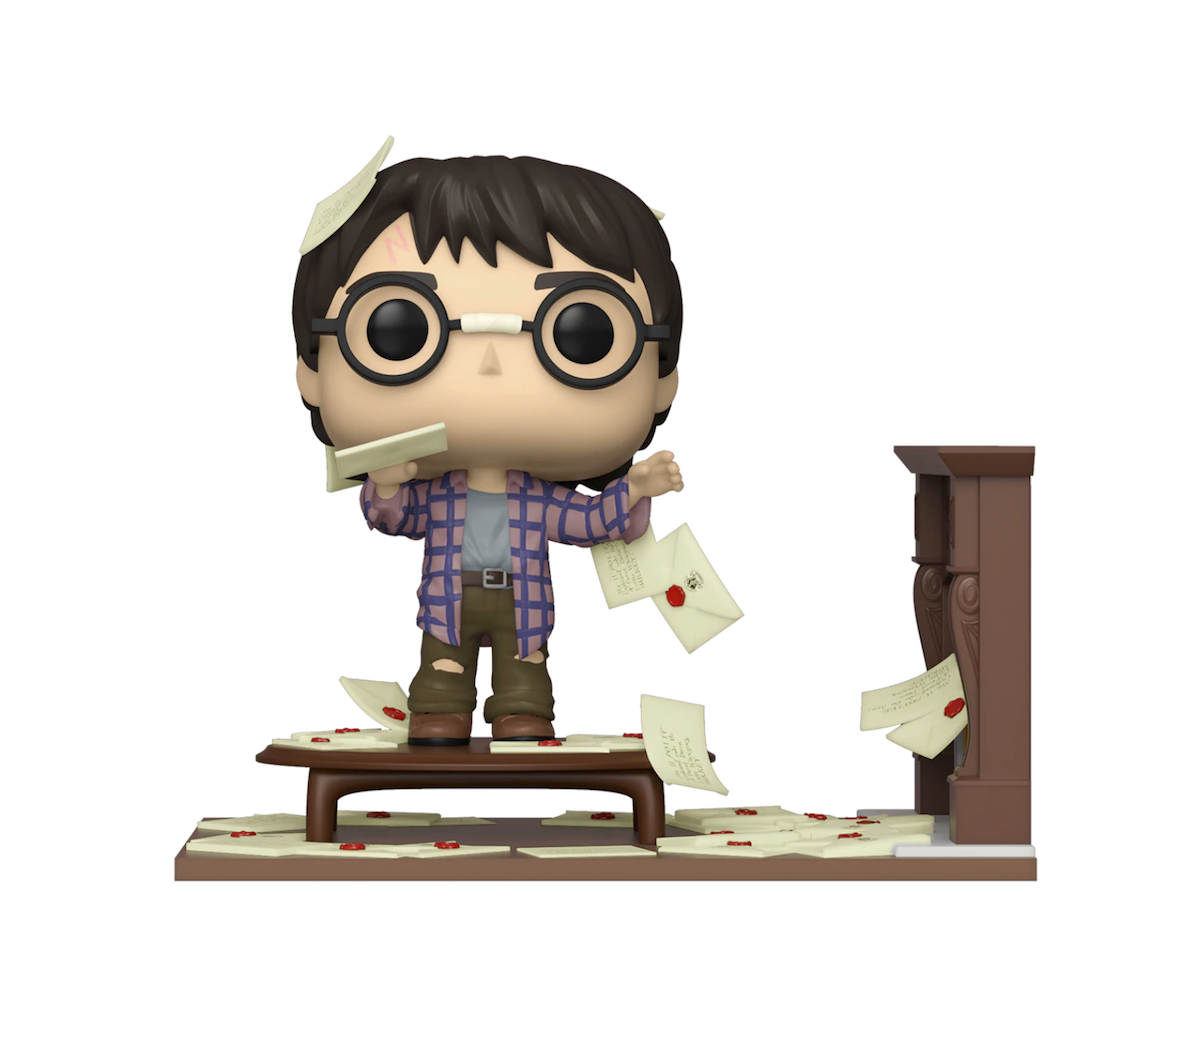 HARRY POTTER WITH HOGWARTS LETTERS DELUXE FUNKO SHOP EXCLUSIVE POP